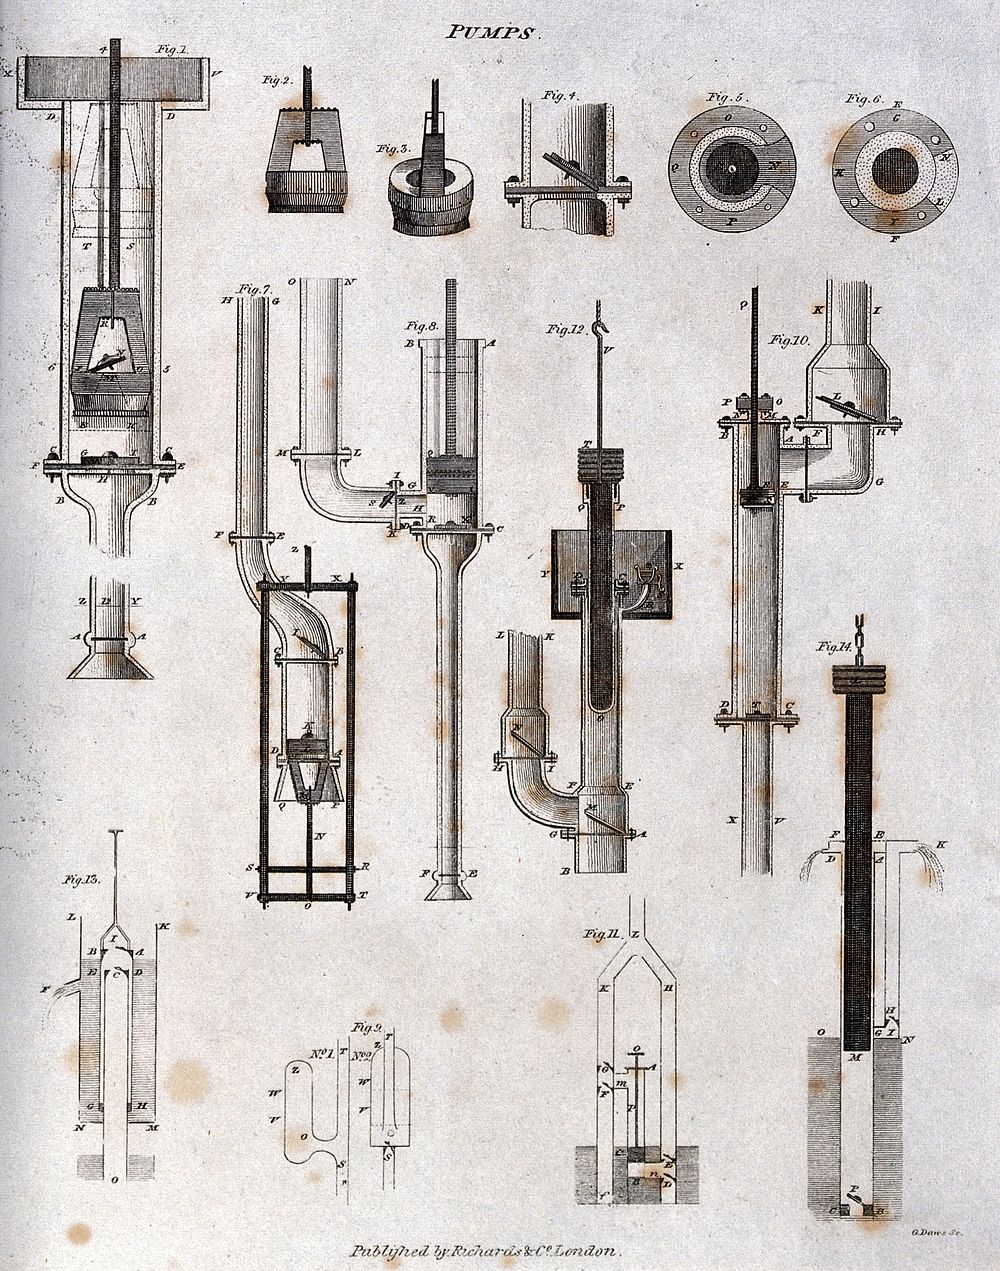 Hydraulics: a pump for sanitary use []. Engraving by G. Daws.